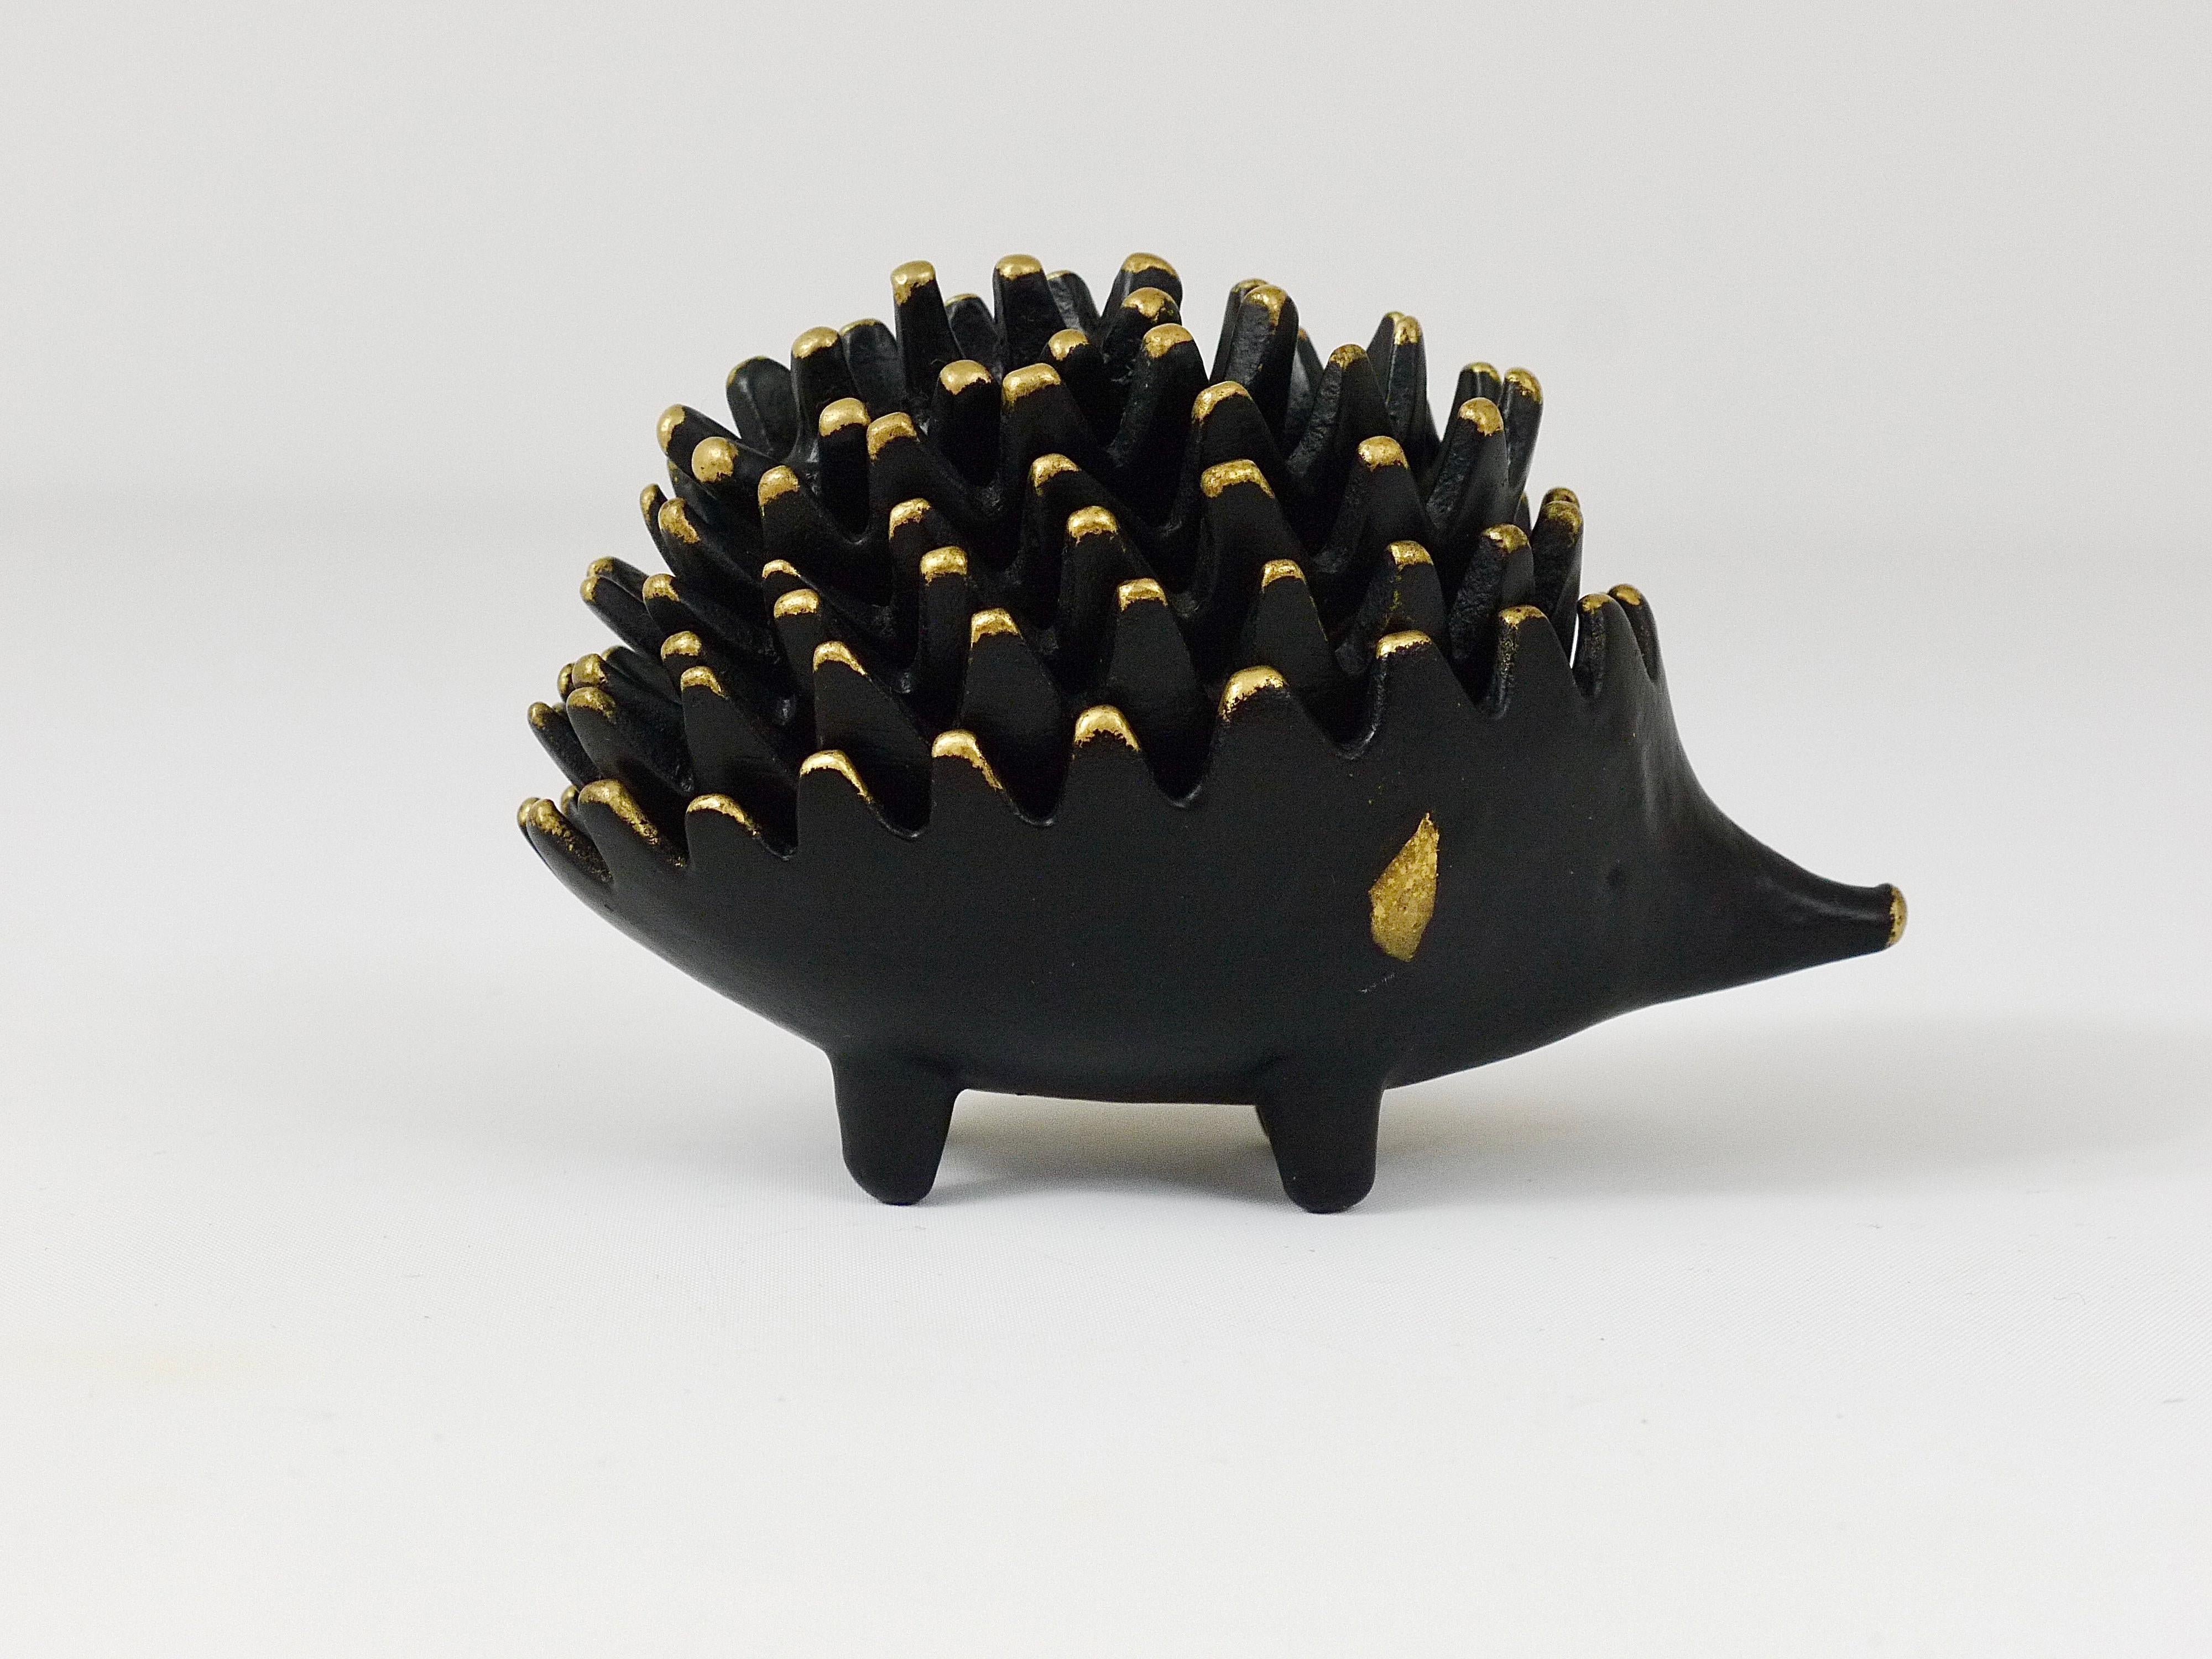 A complete set of six vintage stackable midcentury hedgehog ashtrays. A very humorous design by Walter Bosse, executed by Hertha Baller, Austria in the 1950s. Made of brass, in good condition with marginal patina.